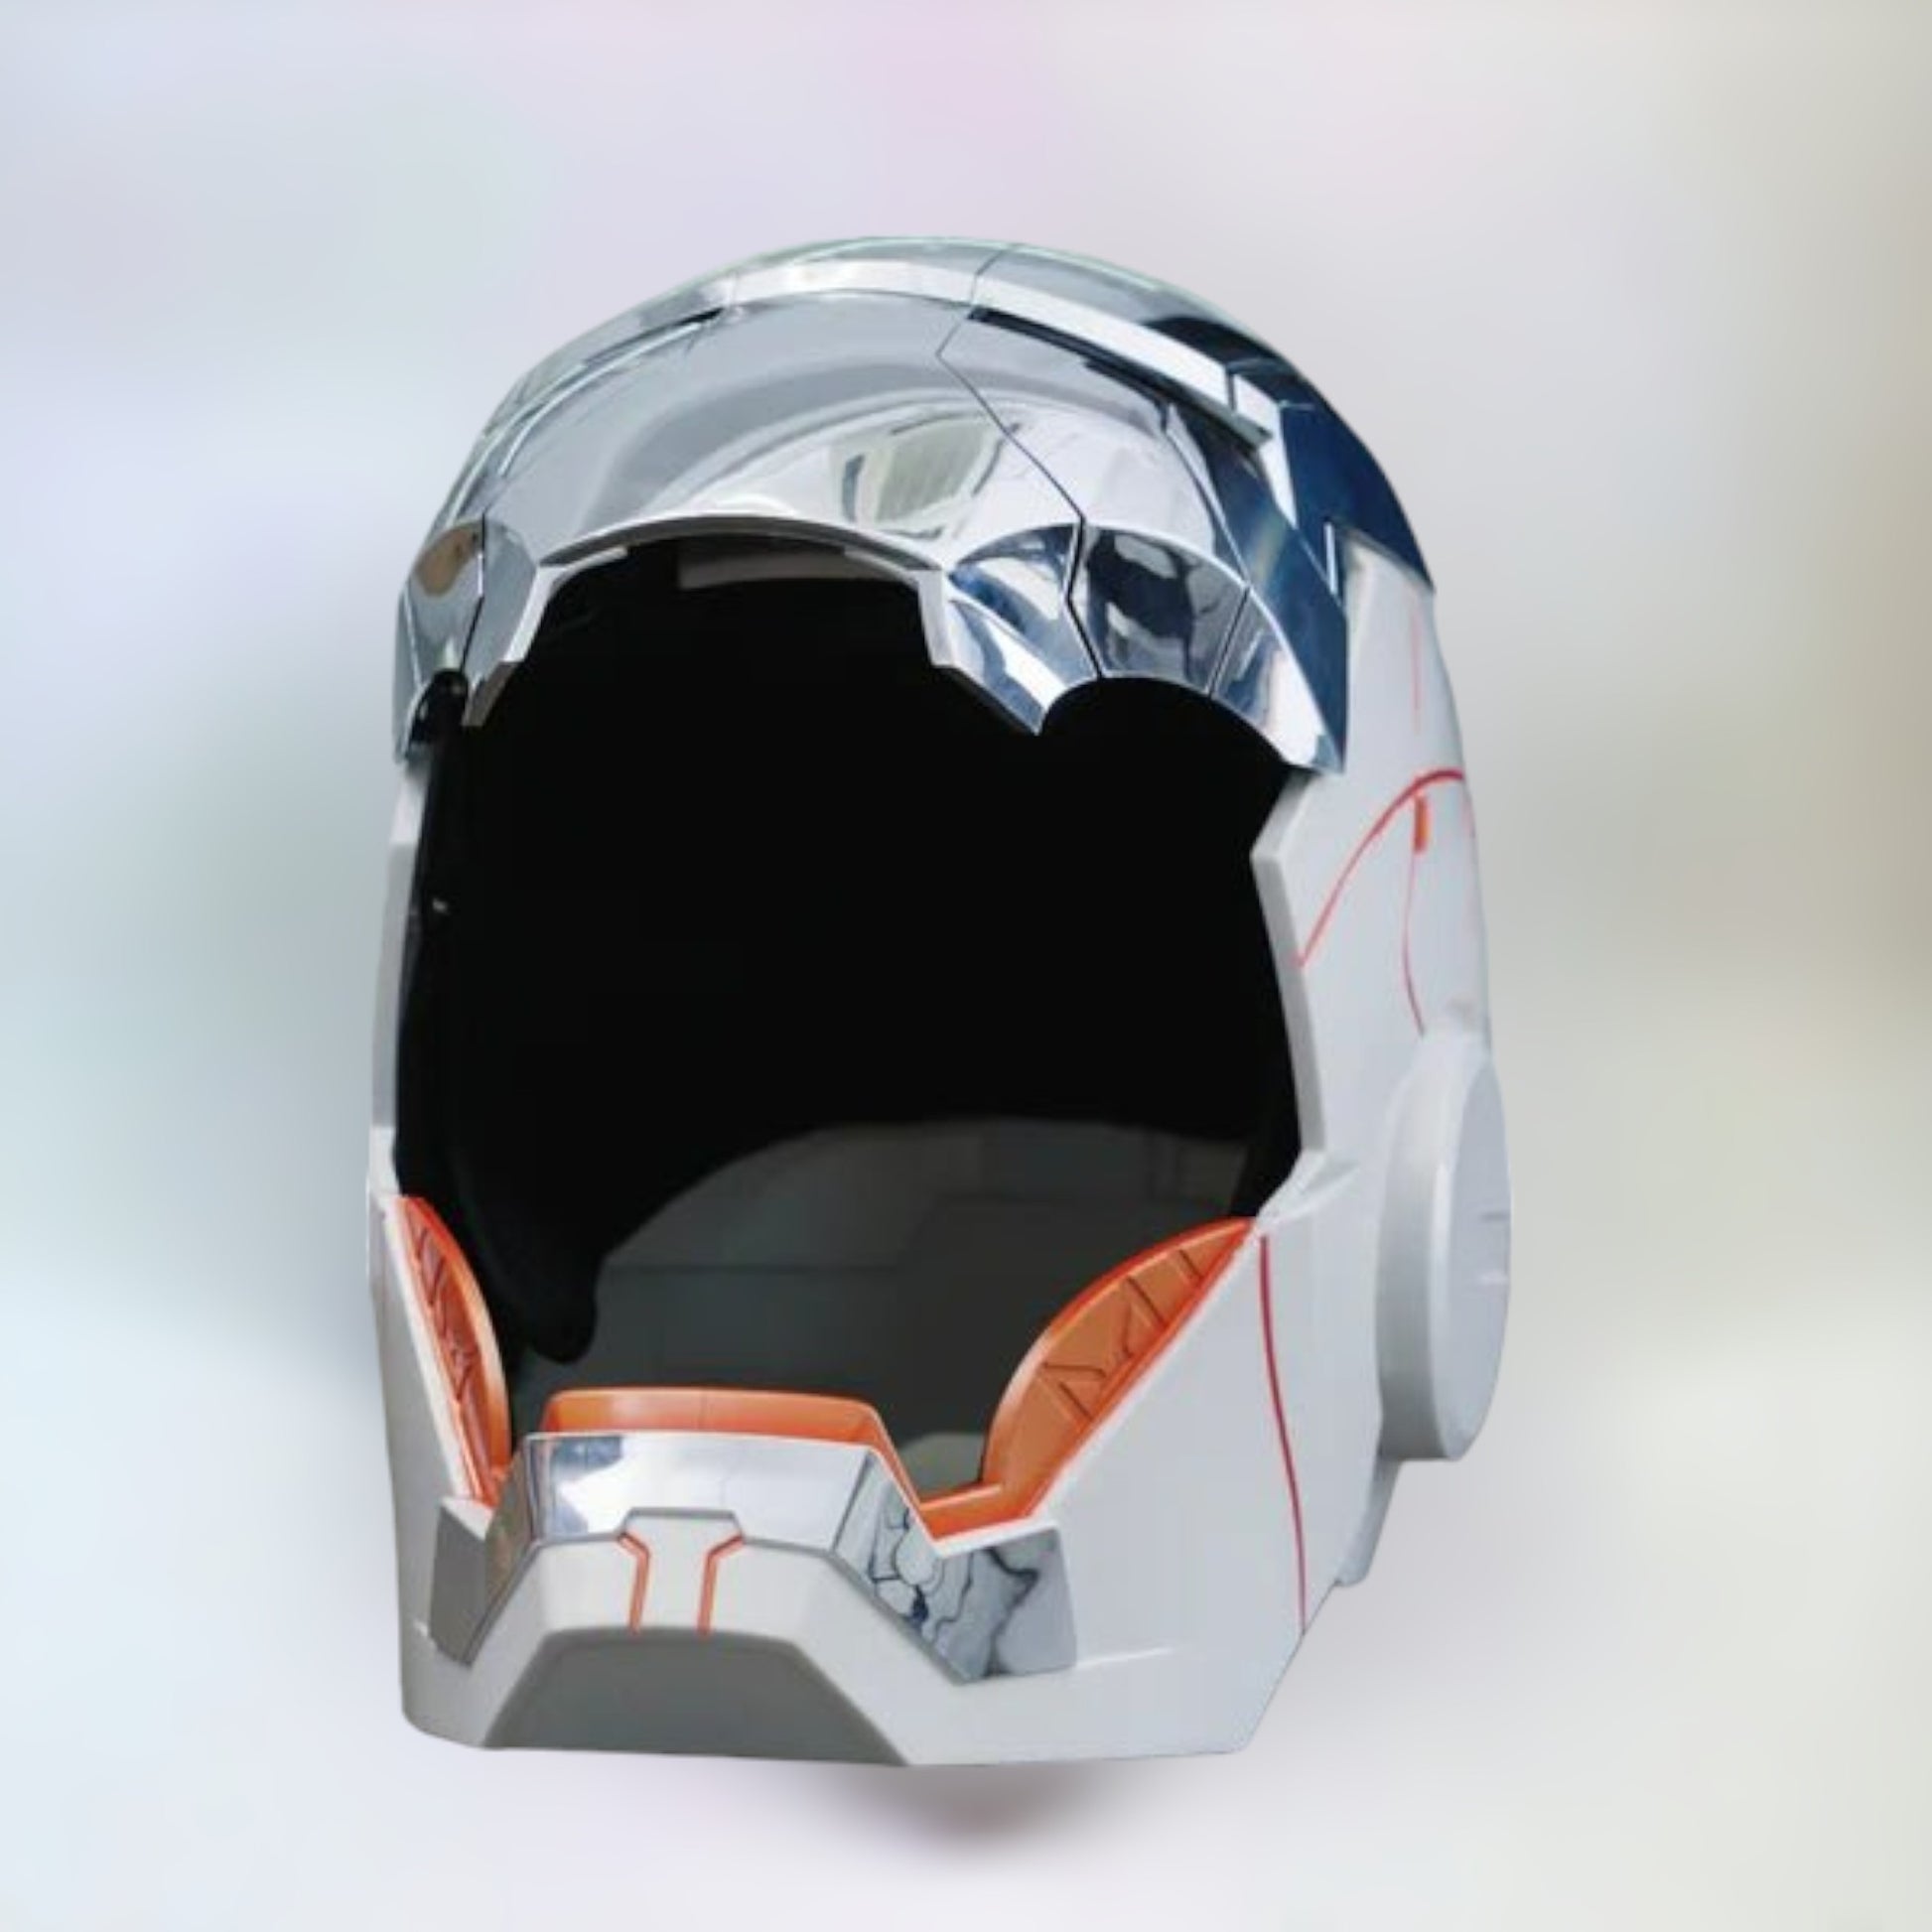 Iron Man Helmet MK5 White Edition with Jarvis Voice Control with Open Style 2 on a plain white background.